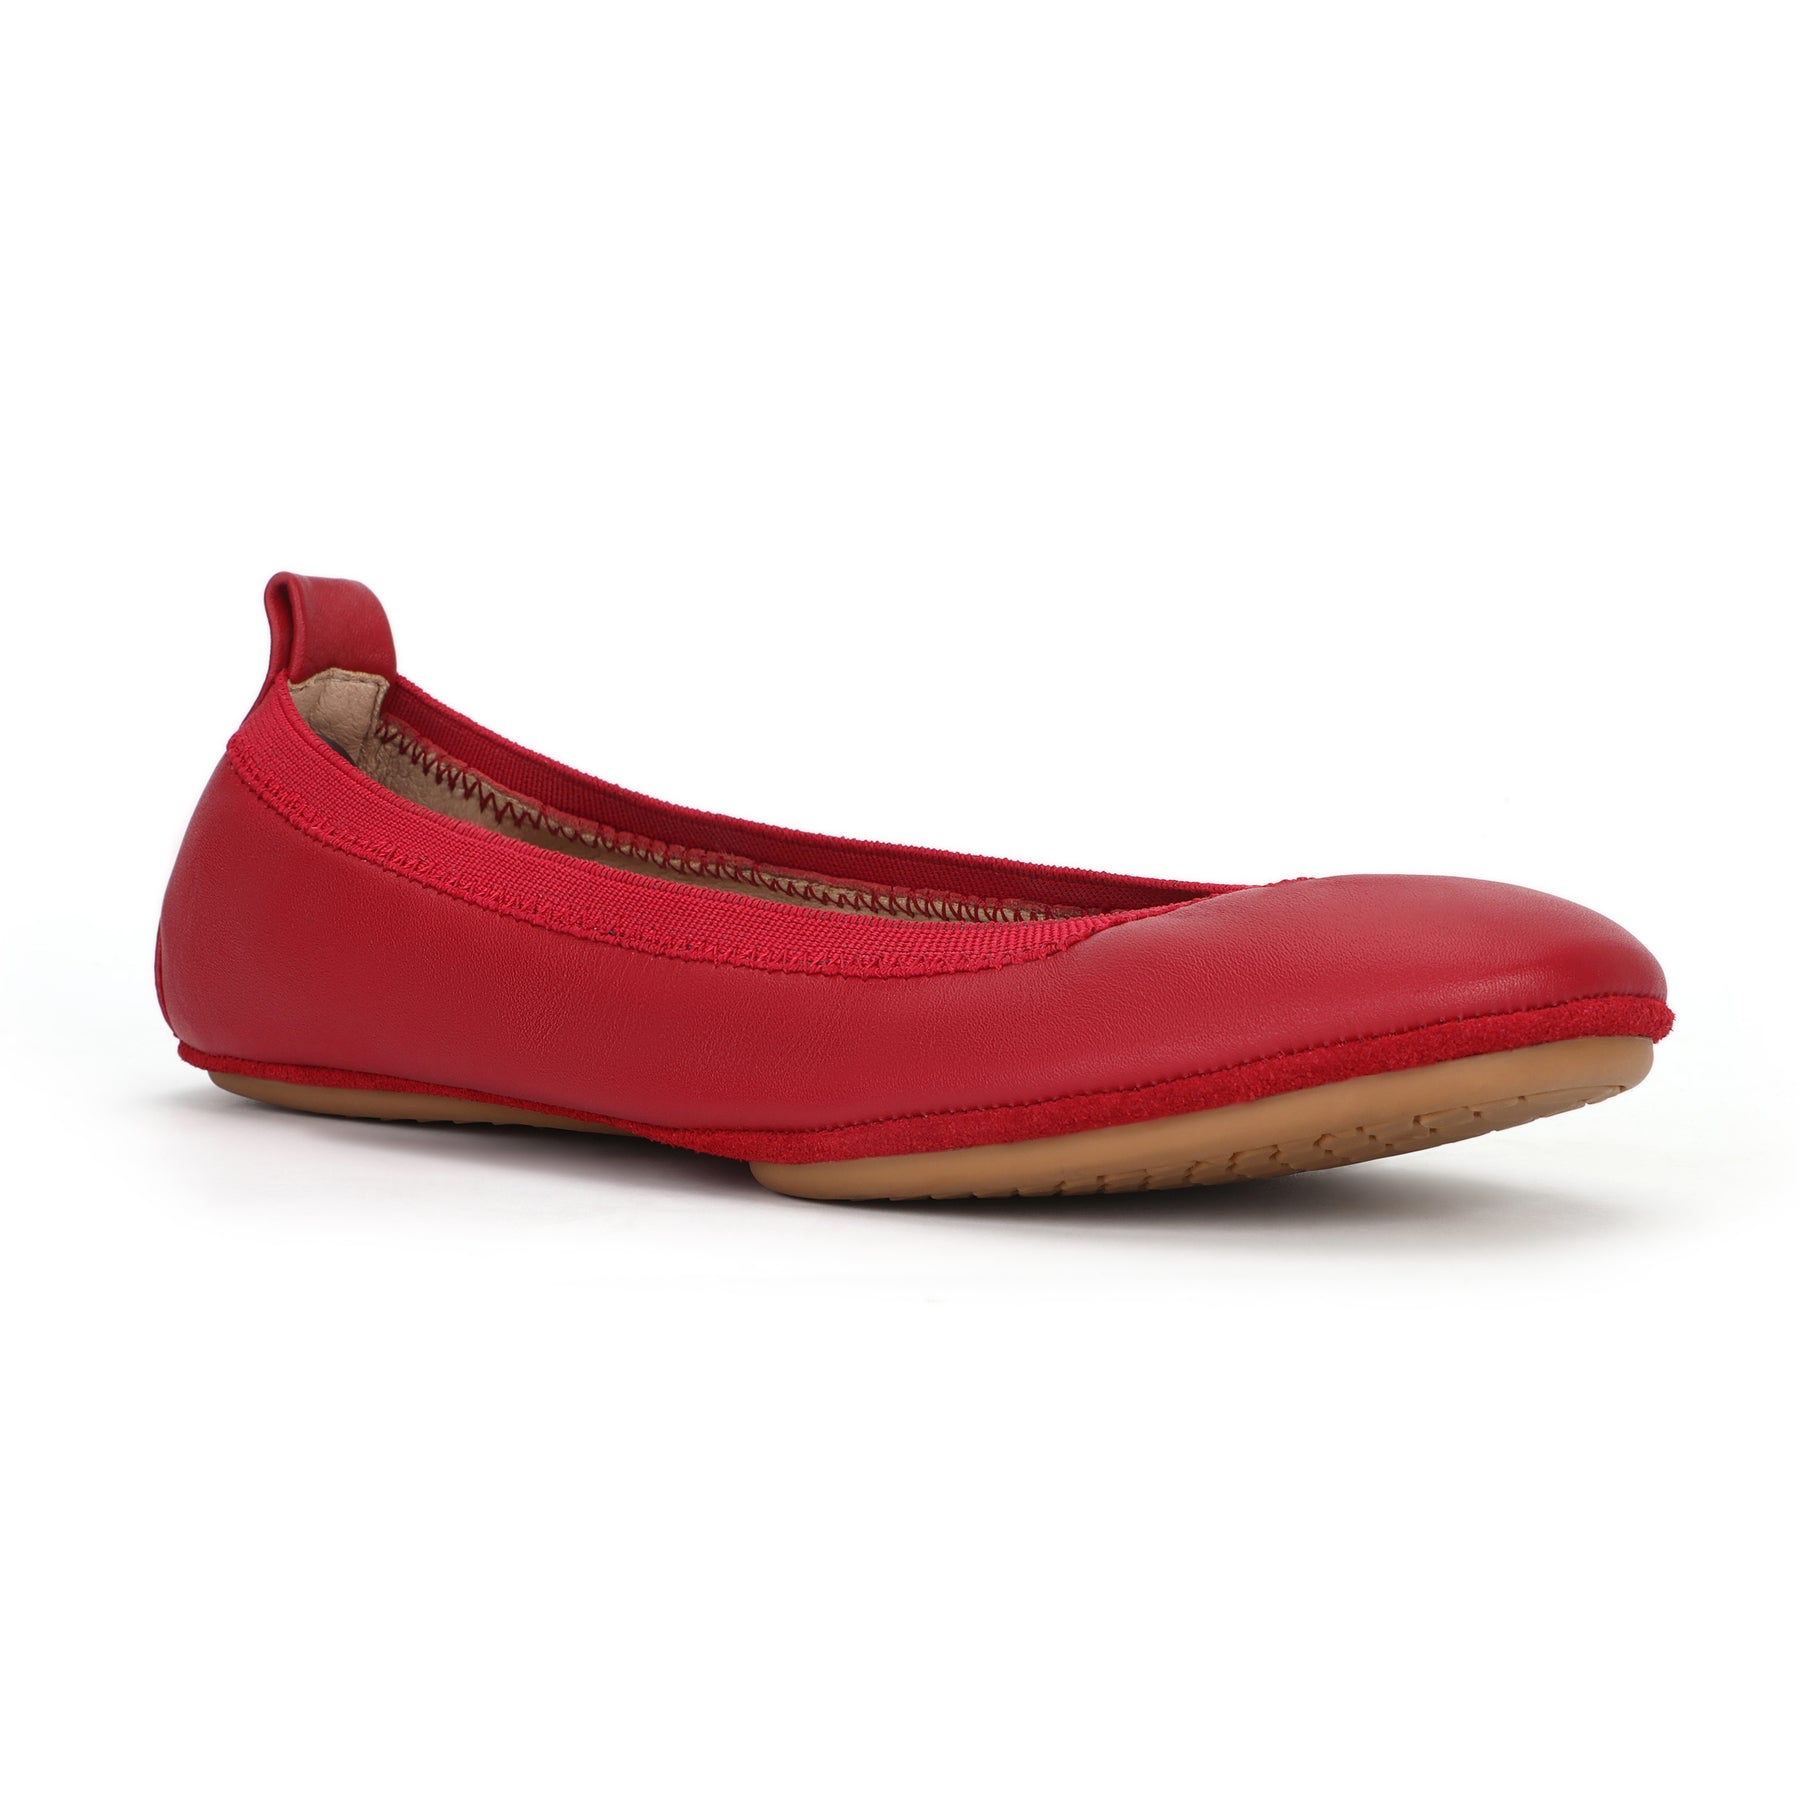 Samara Foldable Ballet Flat in Ruby Red Leather